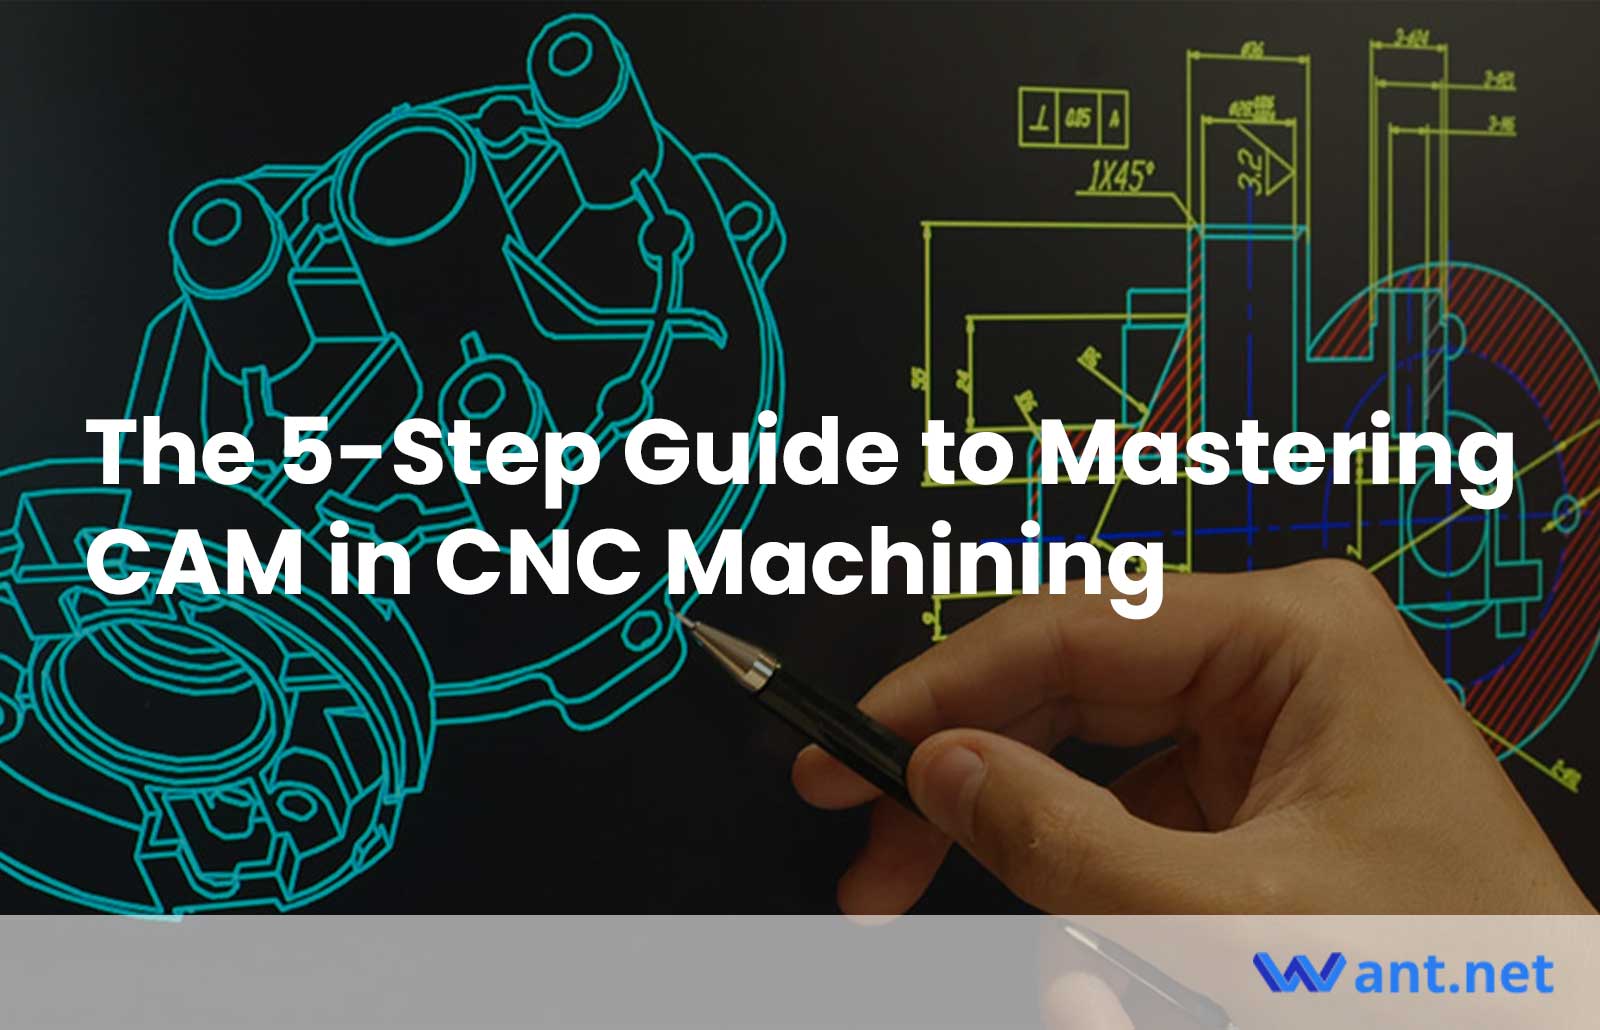 The 5-Step Guide to Mastering CAM in CNC Machining